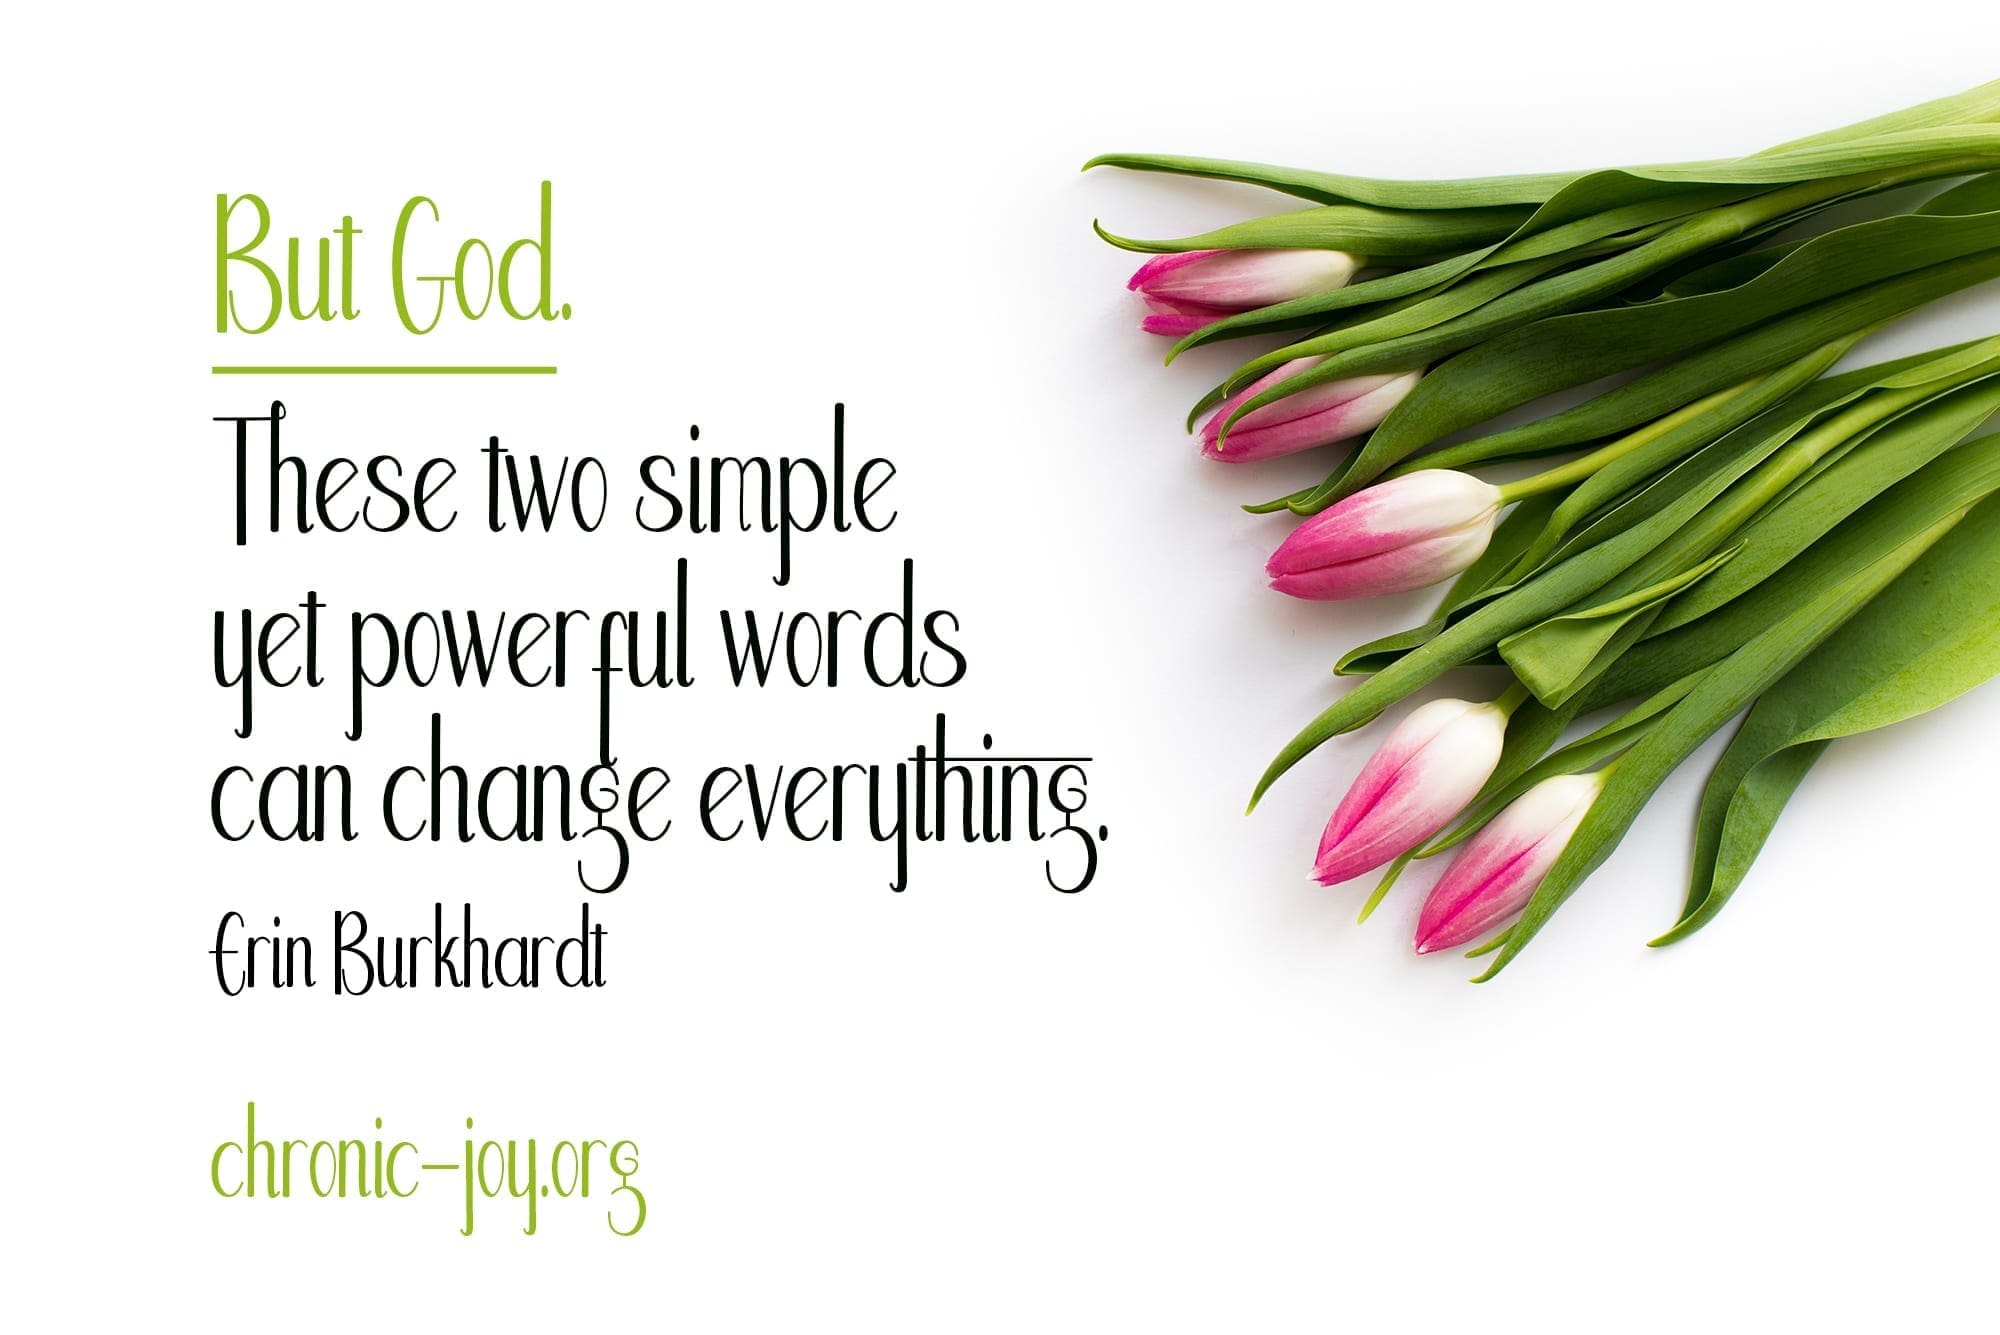 "But God. These two simple yet powerful words can change everything." Erin Burkhardt